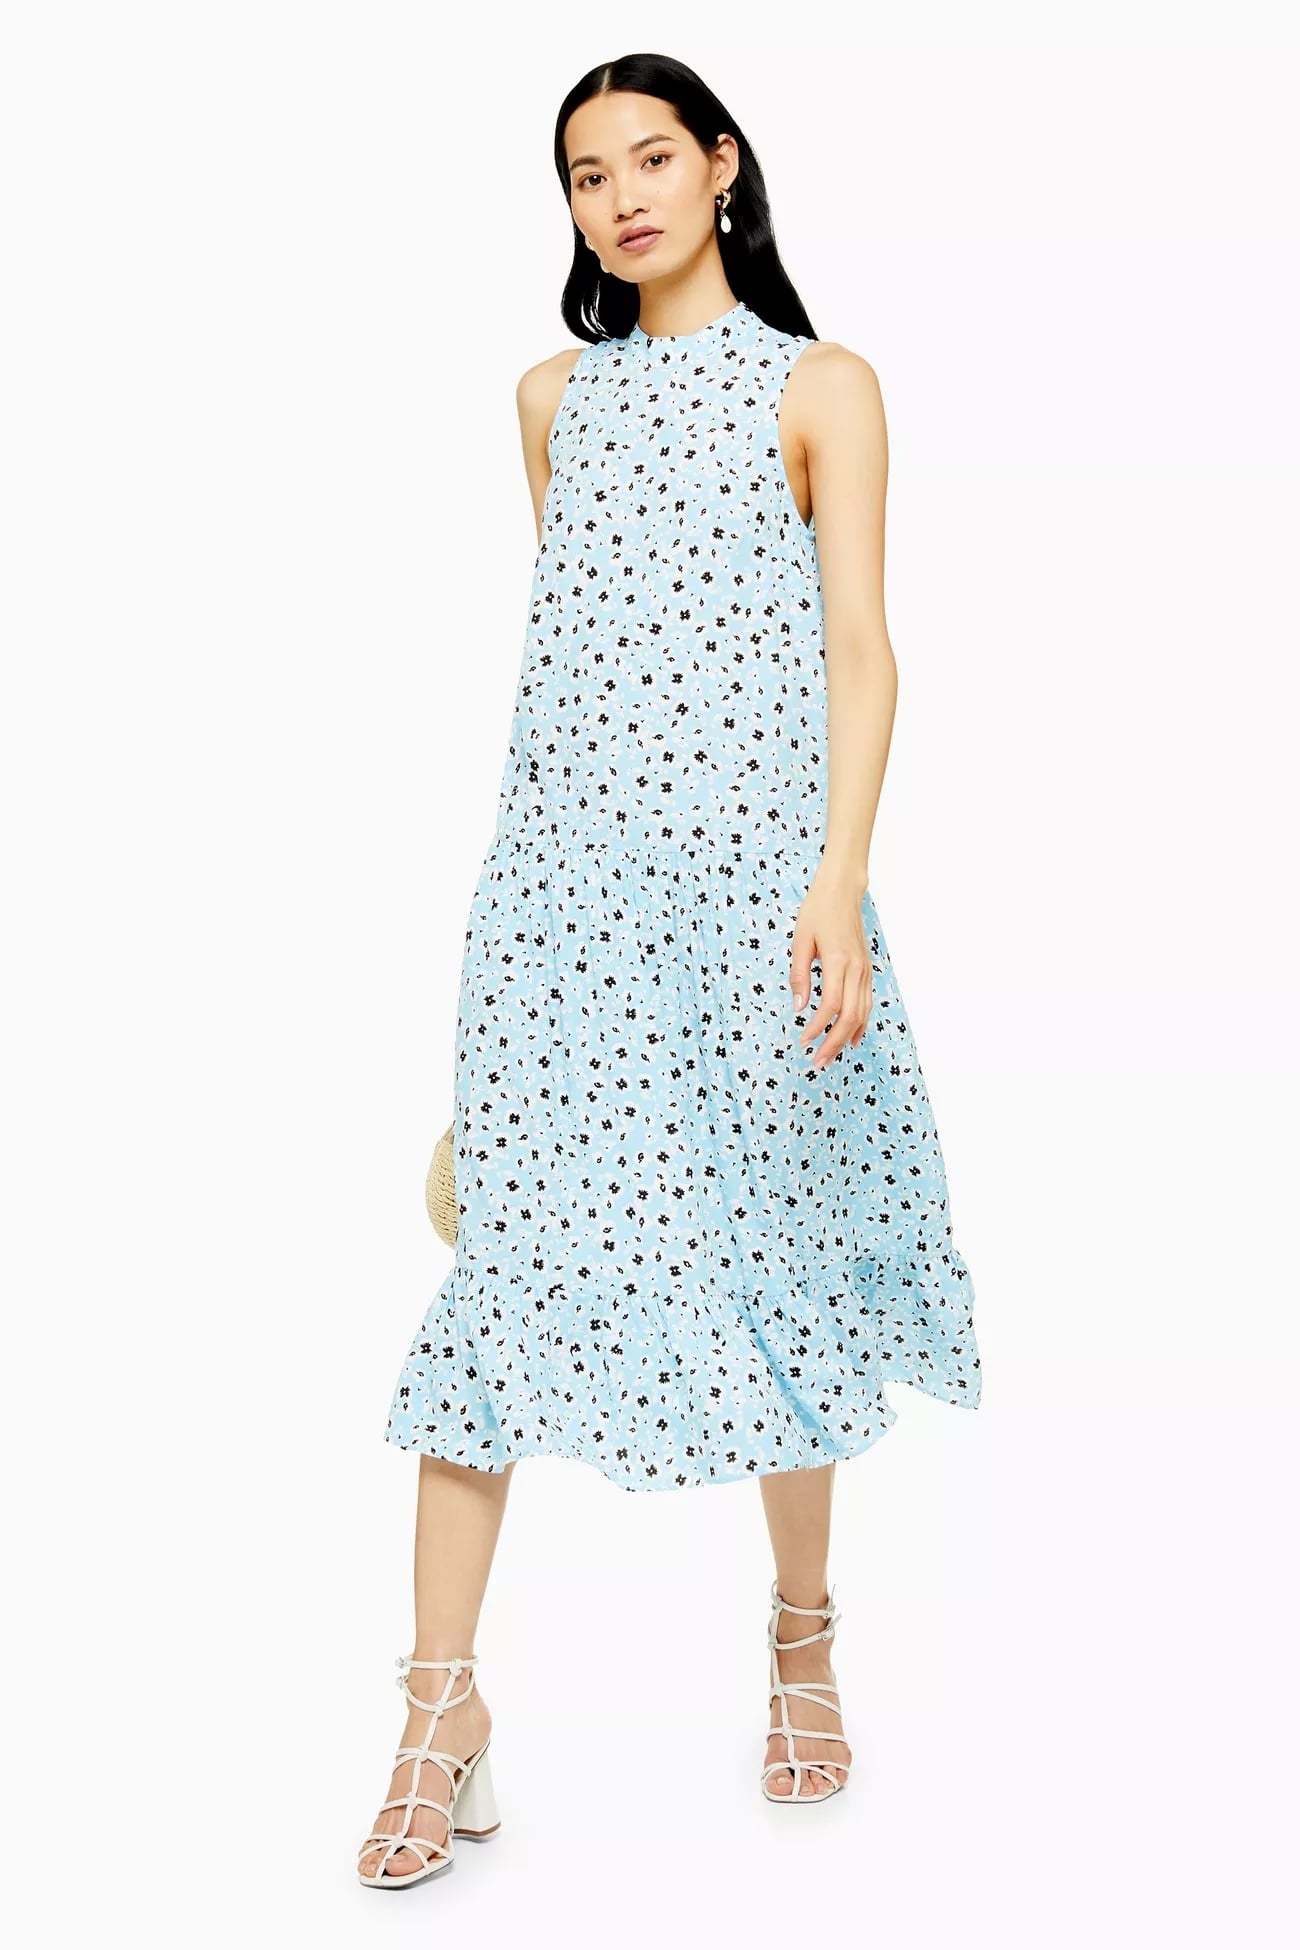 Topshop Tall Blue Floral Sleeveless Dress, 25 Super Pretty Dresses to Wear  to a Casual Wedding, All Under $100